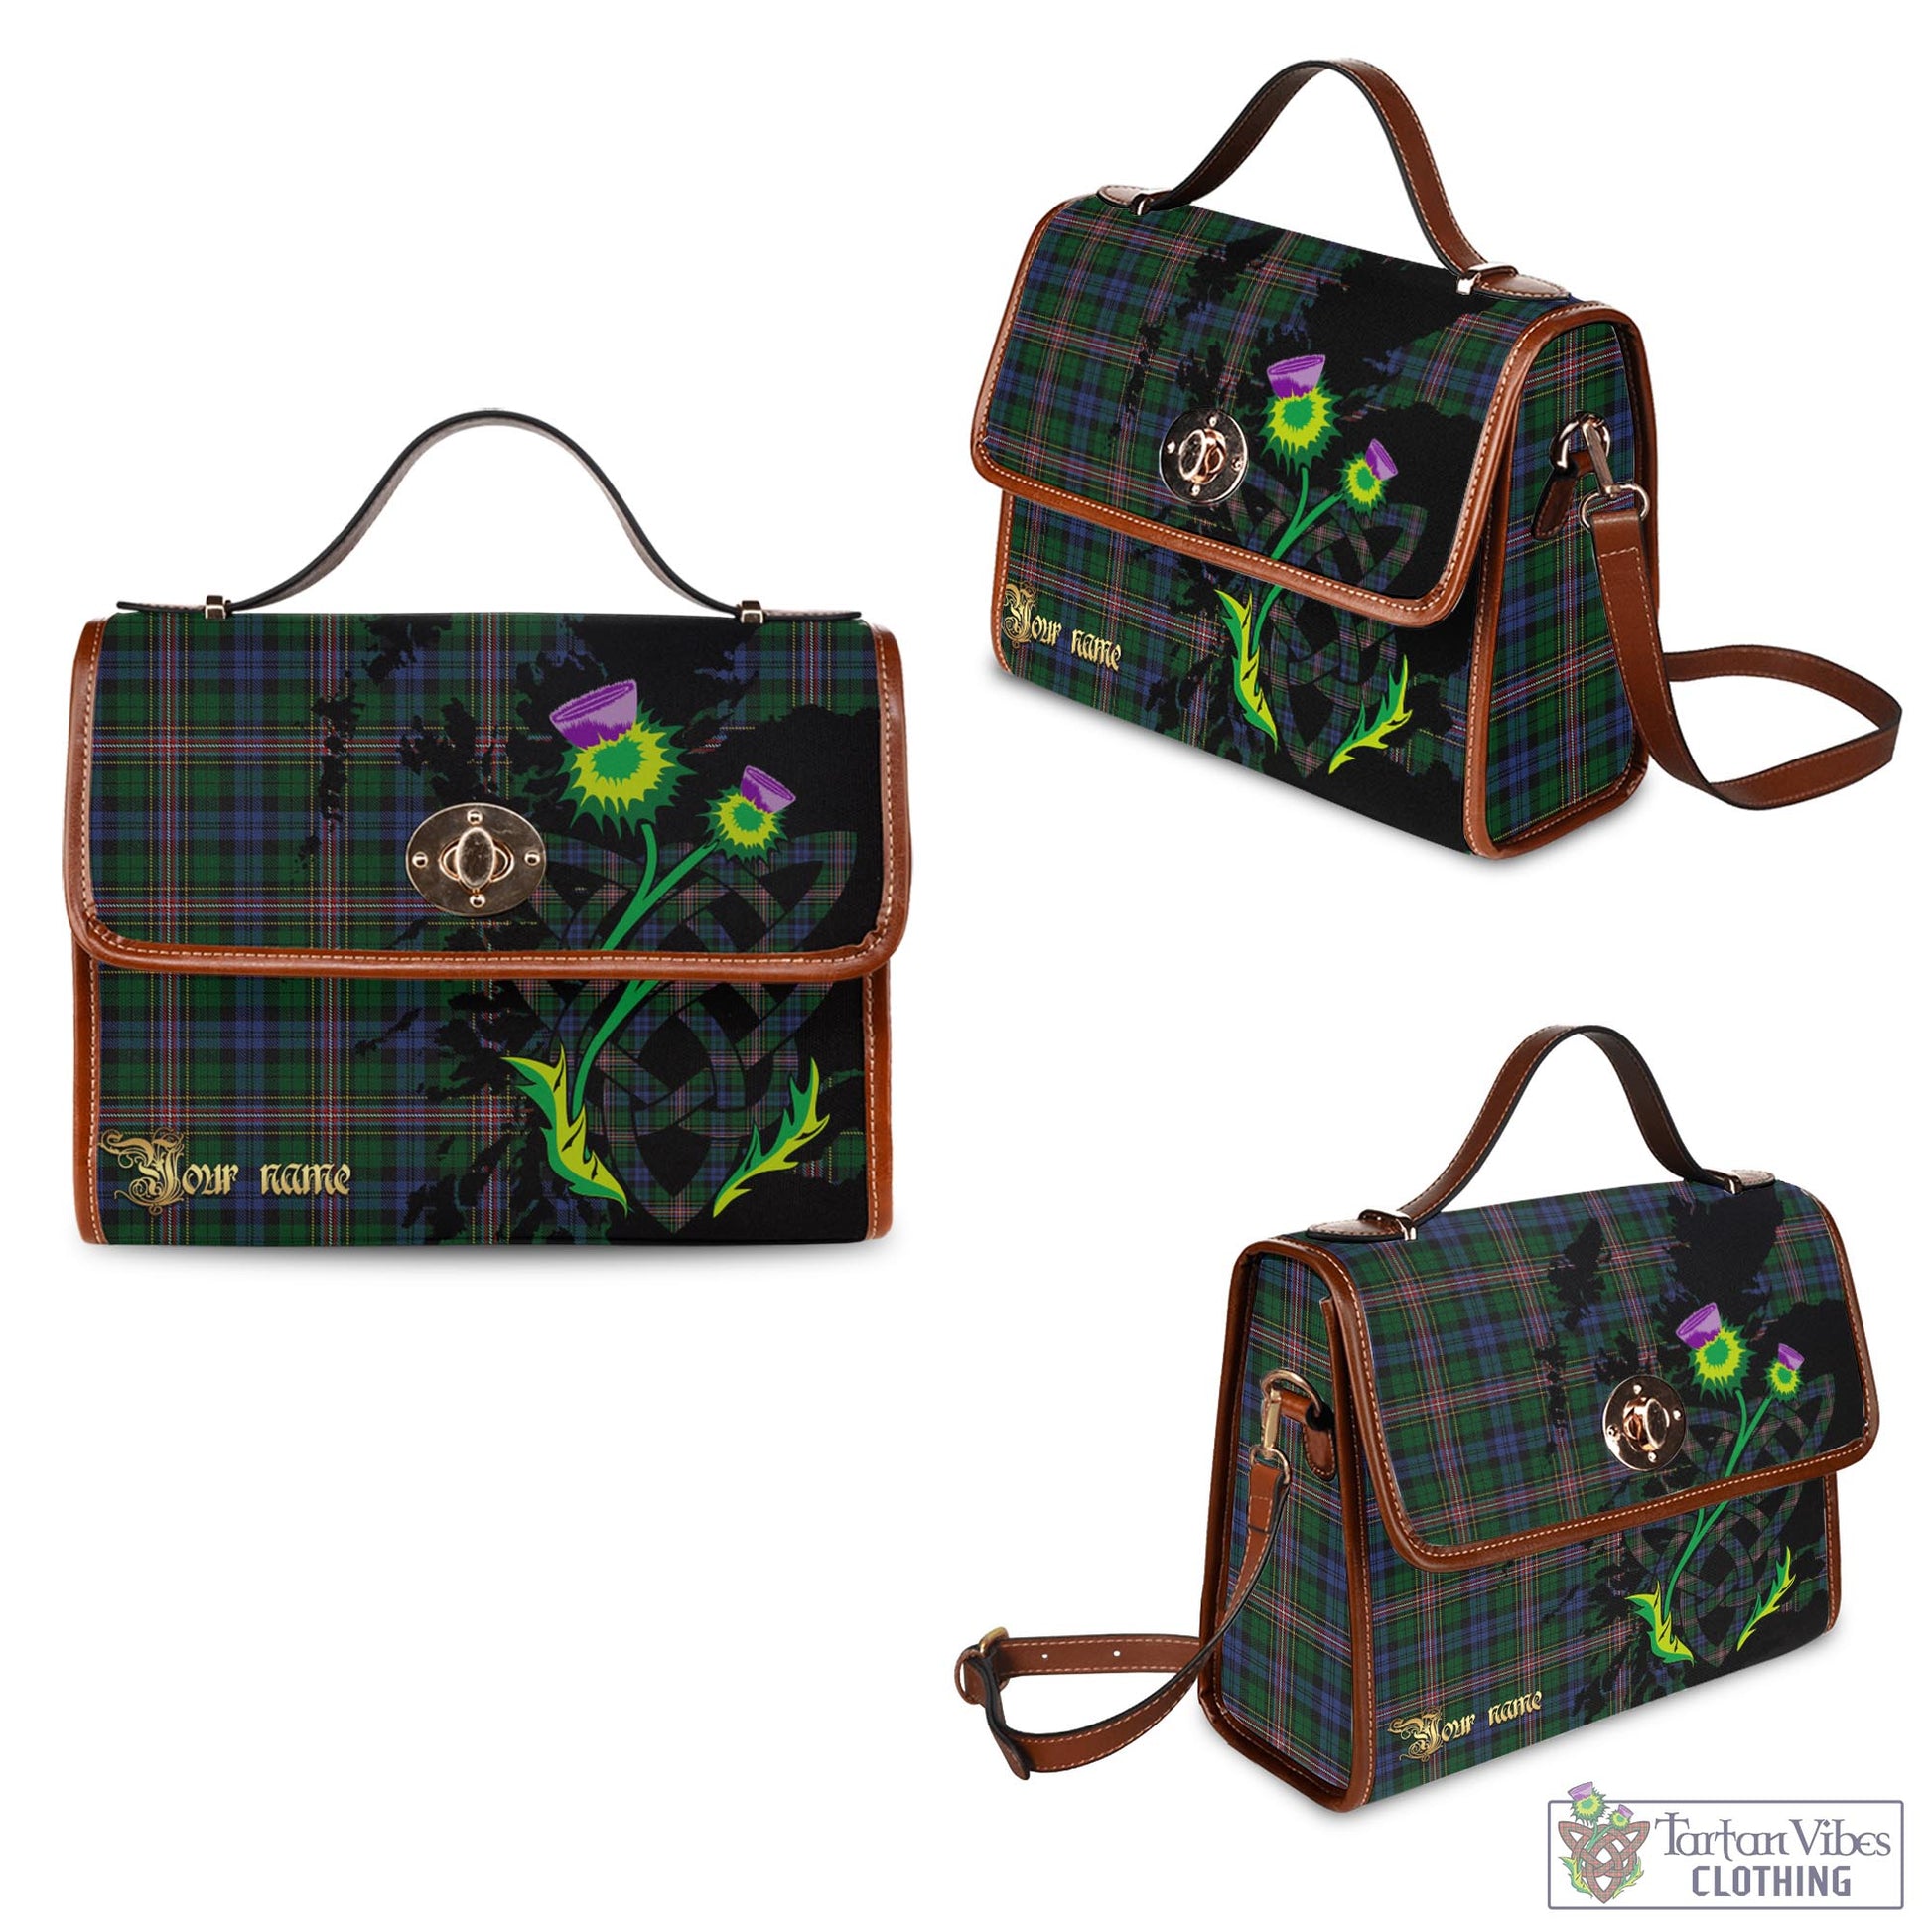 Tartan Vibes Clothing Allison Tartan Waterproof Canvas Bag with Scotland Map and Thistle Celtic Accents